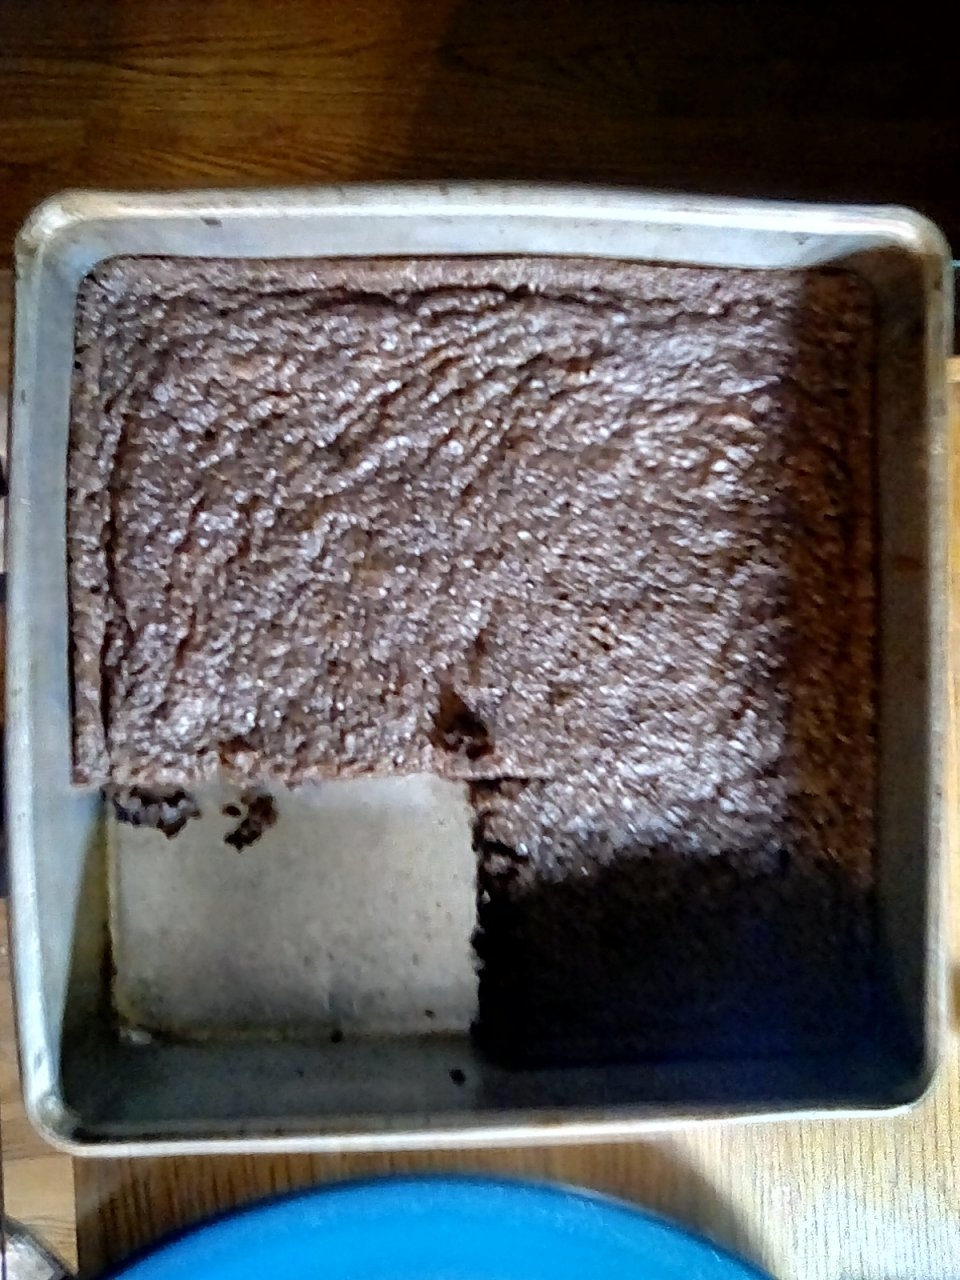 Trim and larf oil brownies one is more than enough do not need any bugging out episodes.